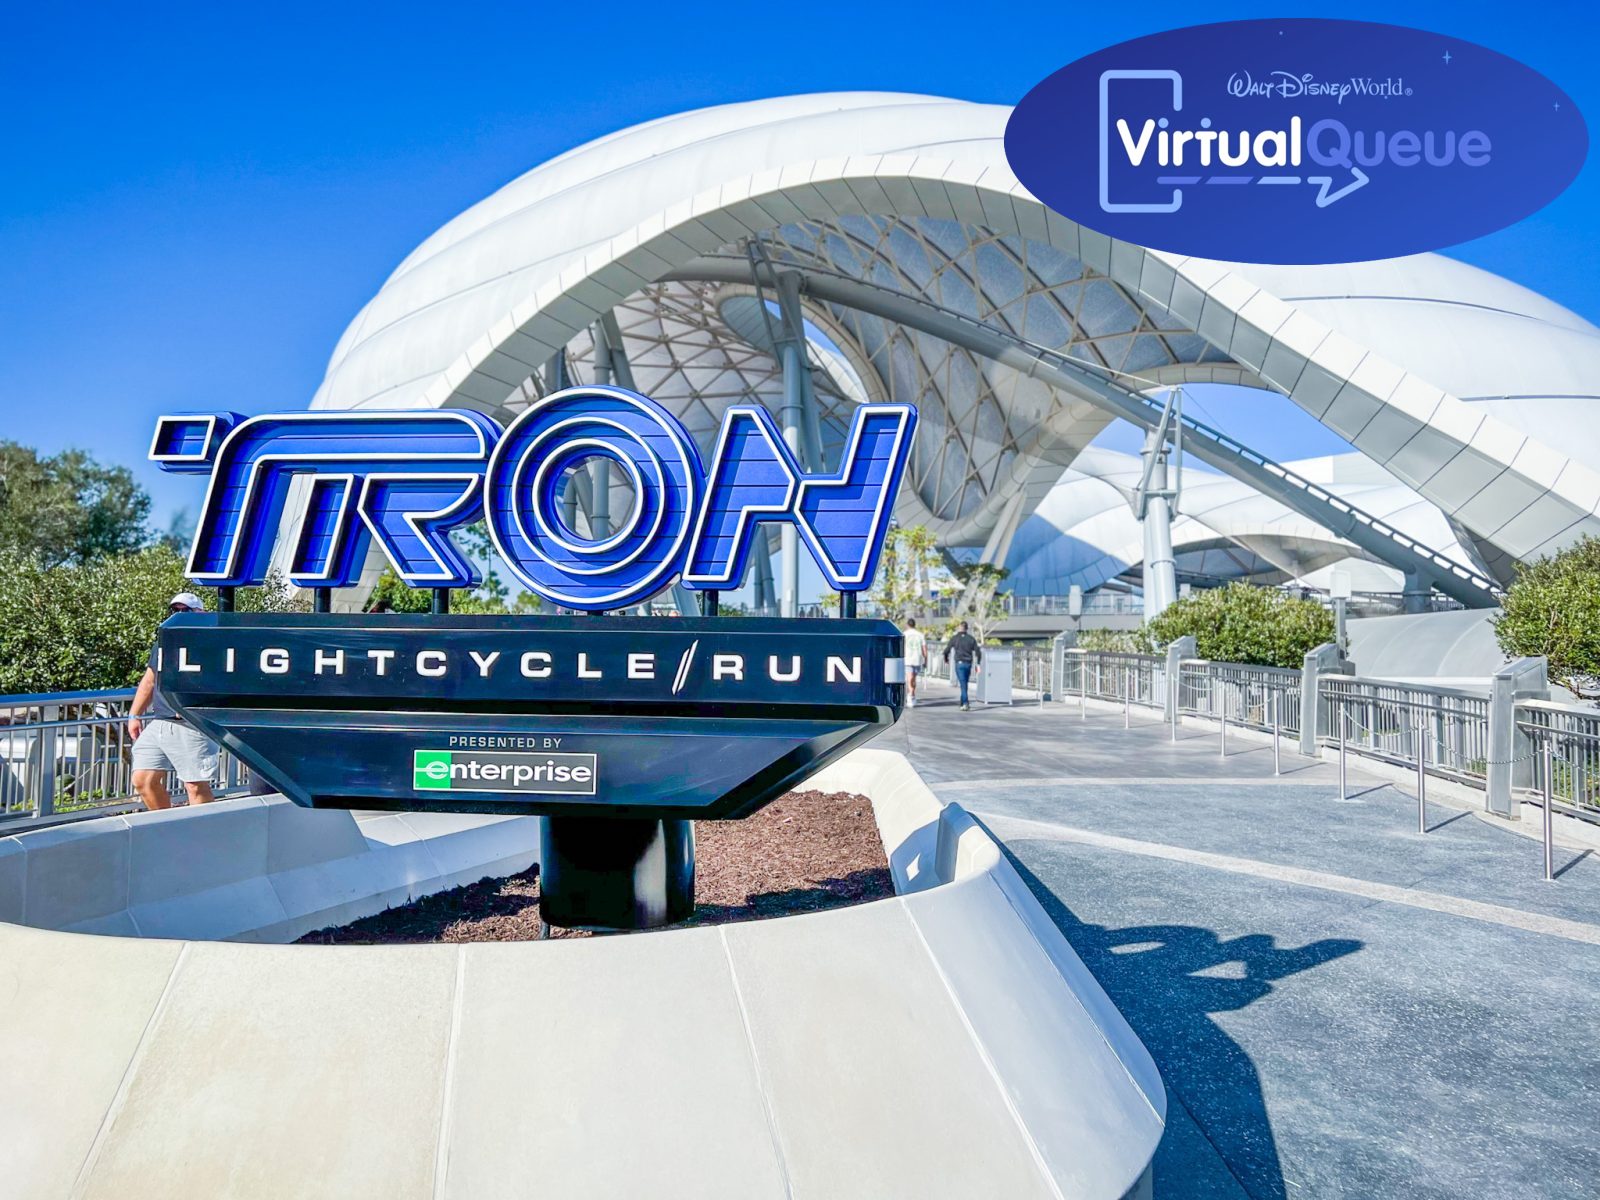 How To Join TRON Virtual Queue